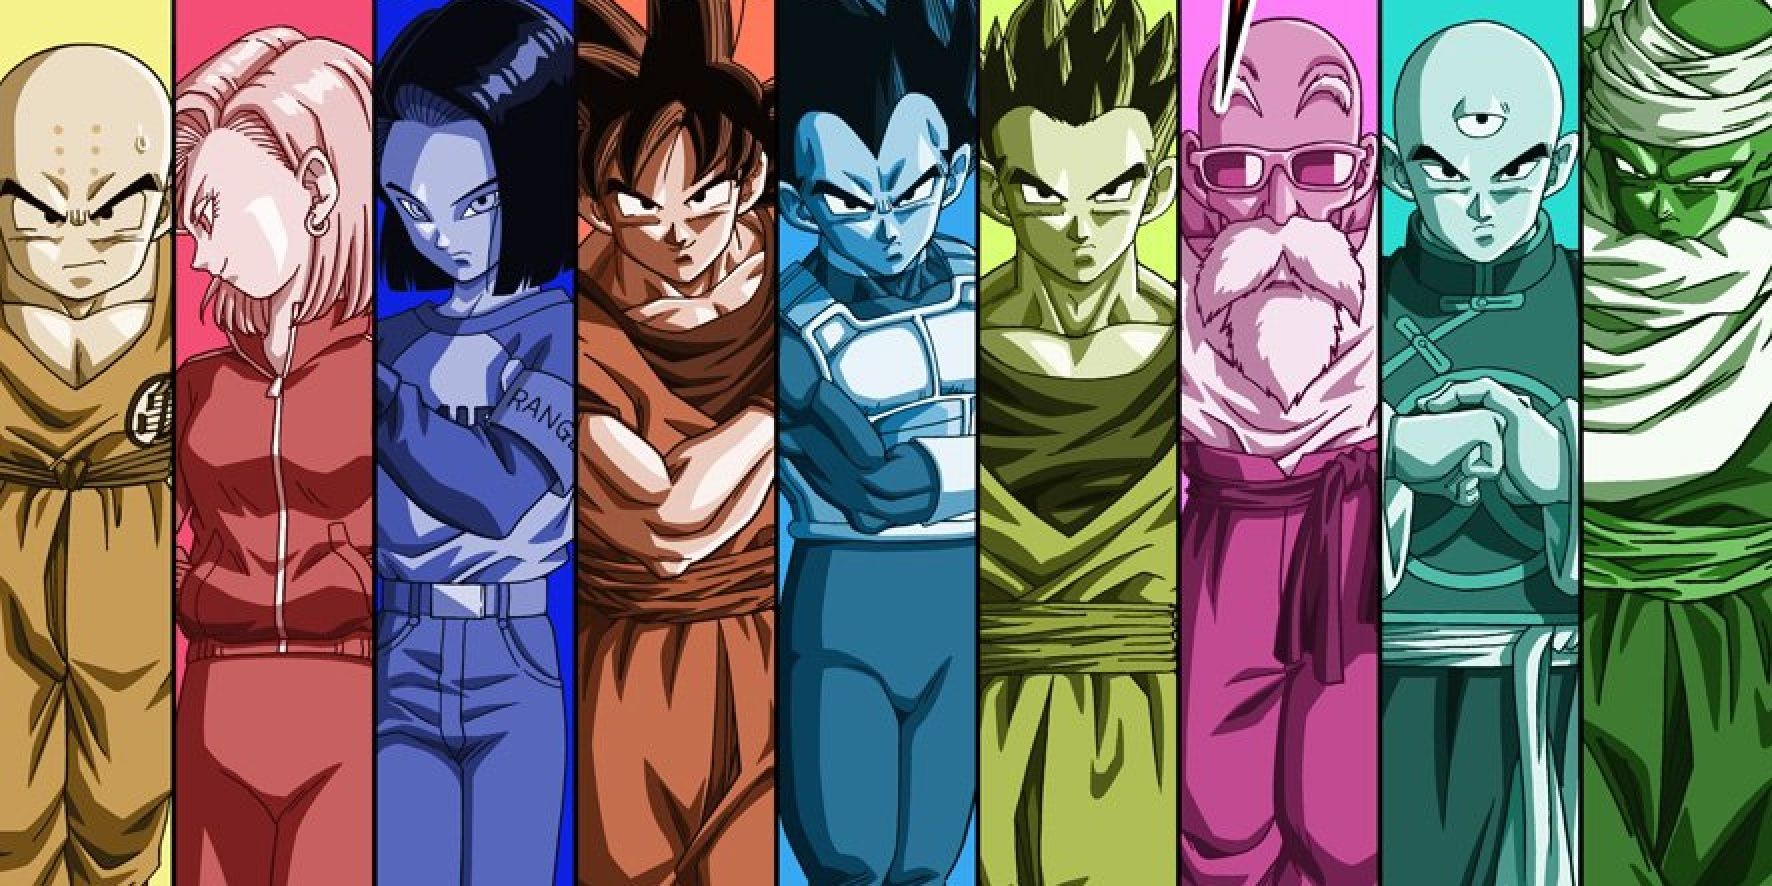 Dragon Ball Super 2: The New Tournament Of Power 2 - The Team